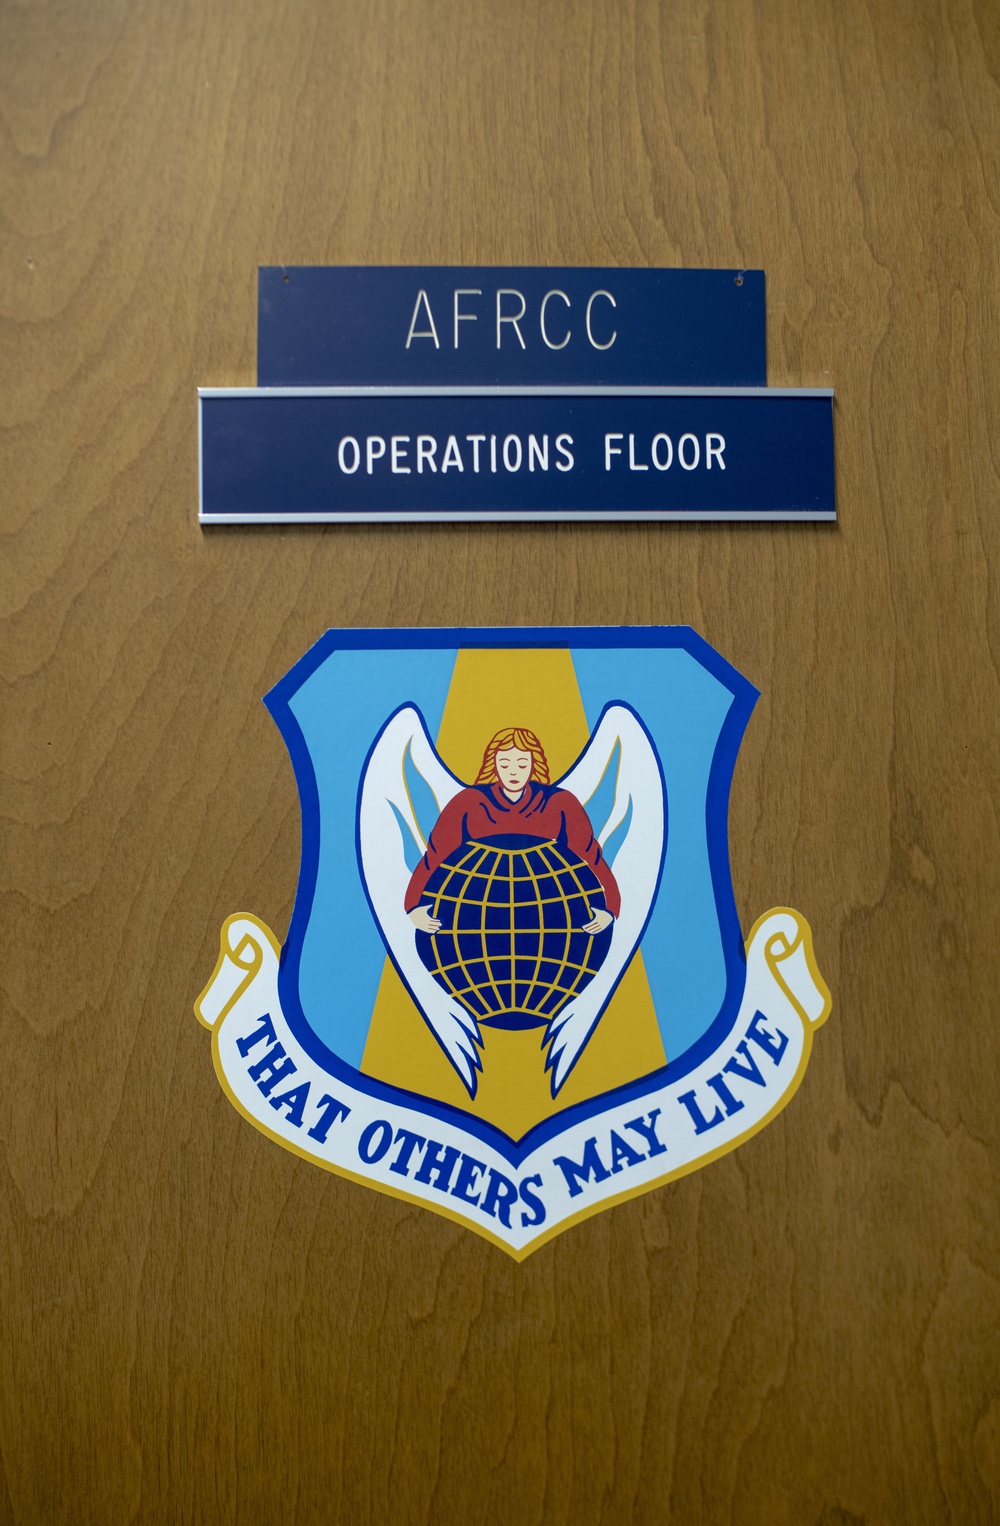 AFRCC controllers perform a life or death mission